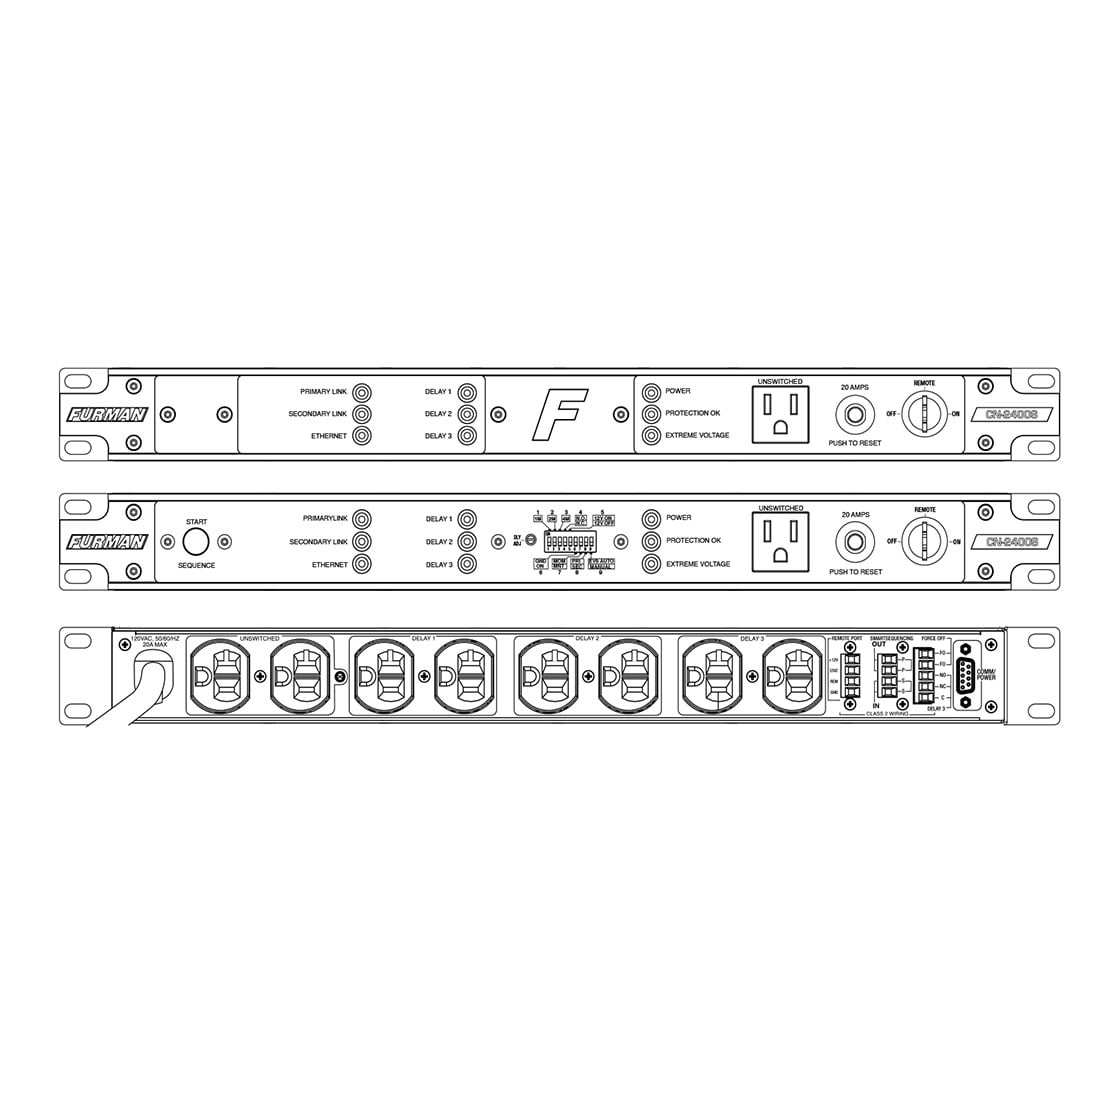 Furman CN-2400S Contractor Series Smart Sequencer Power Conditioner